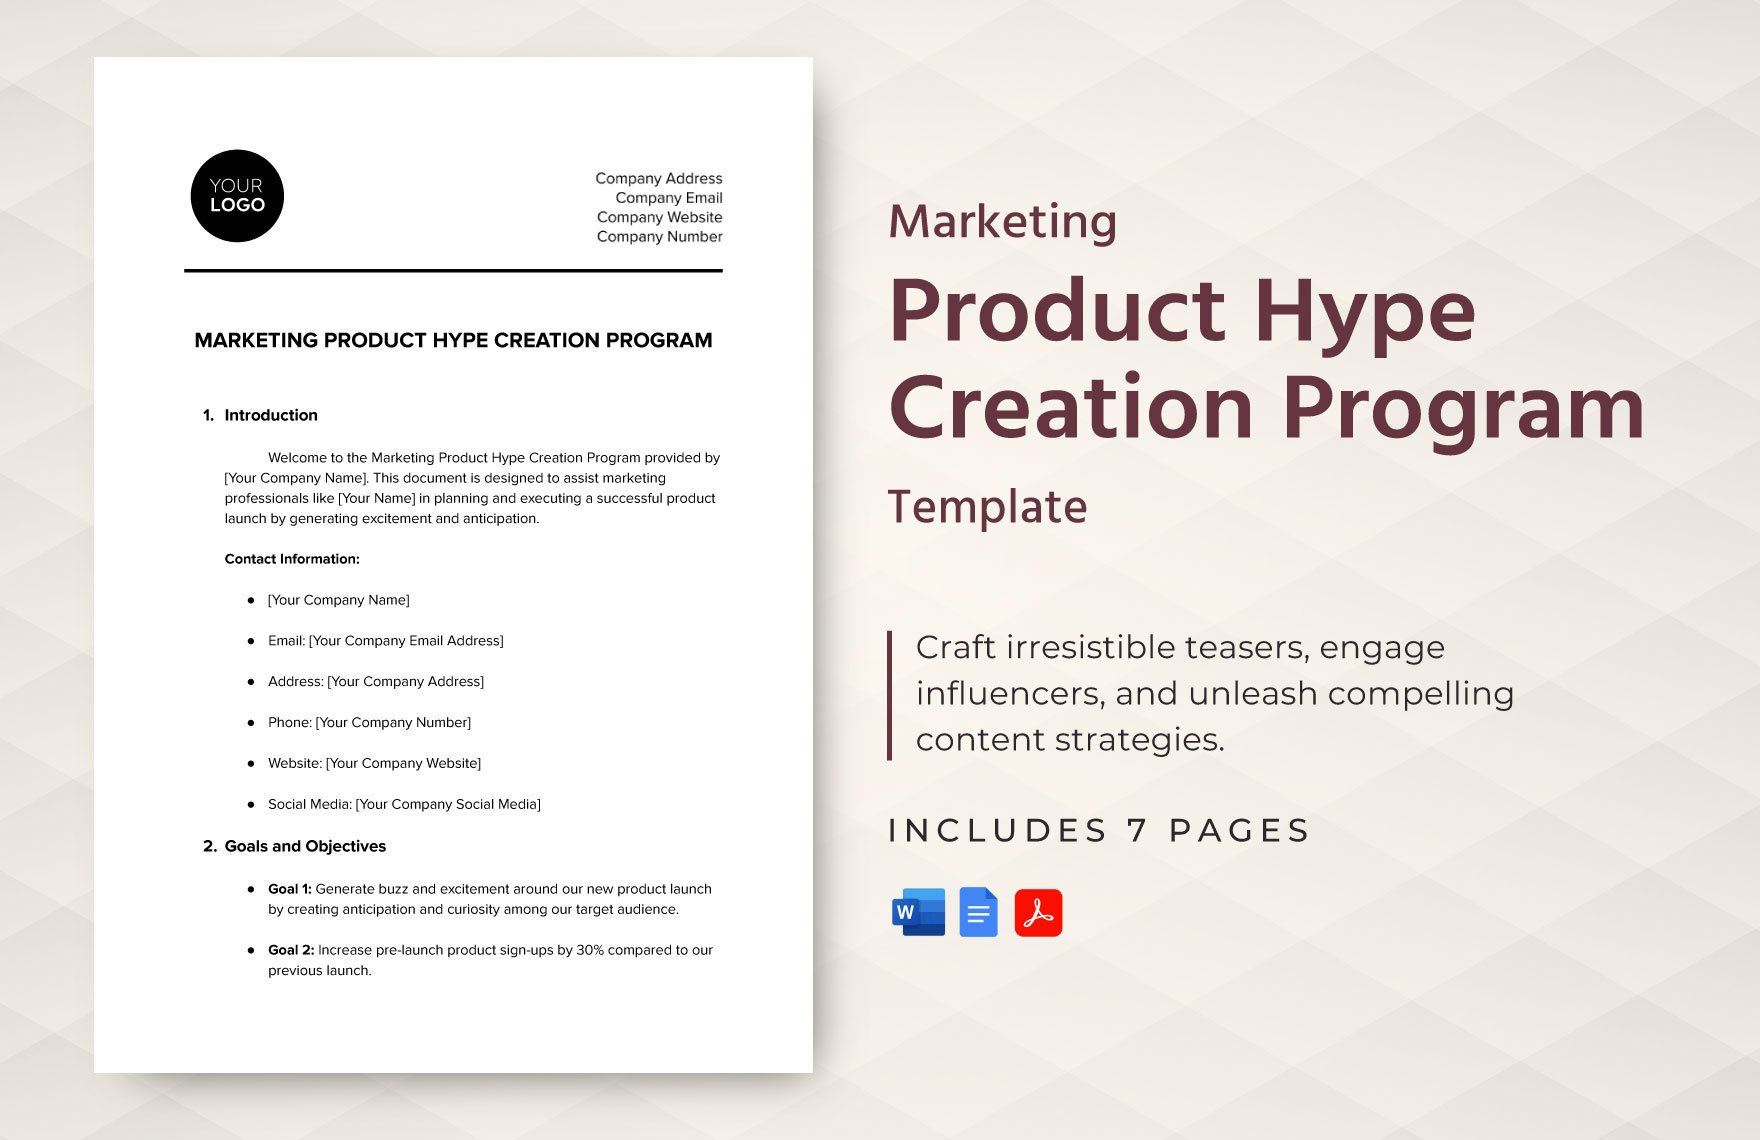 Marketing Product Hype Creation Program Template in Word, Google Docs, PDF